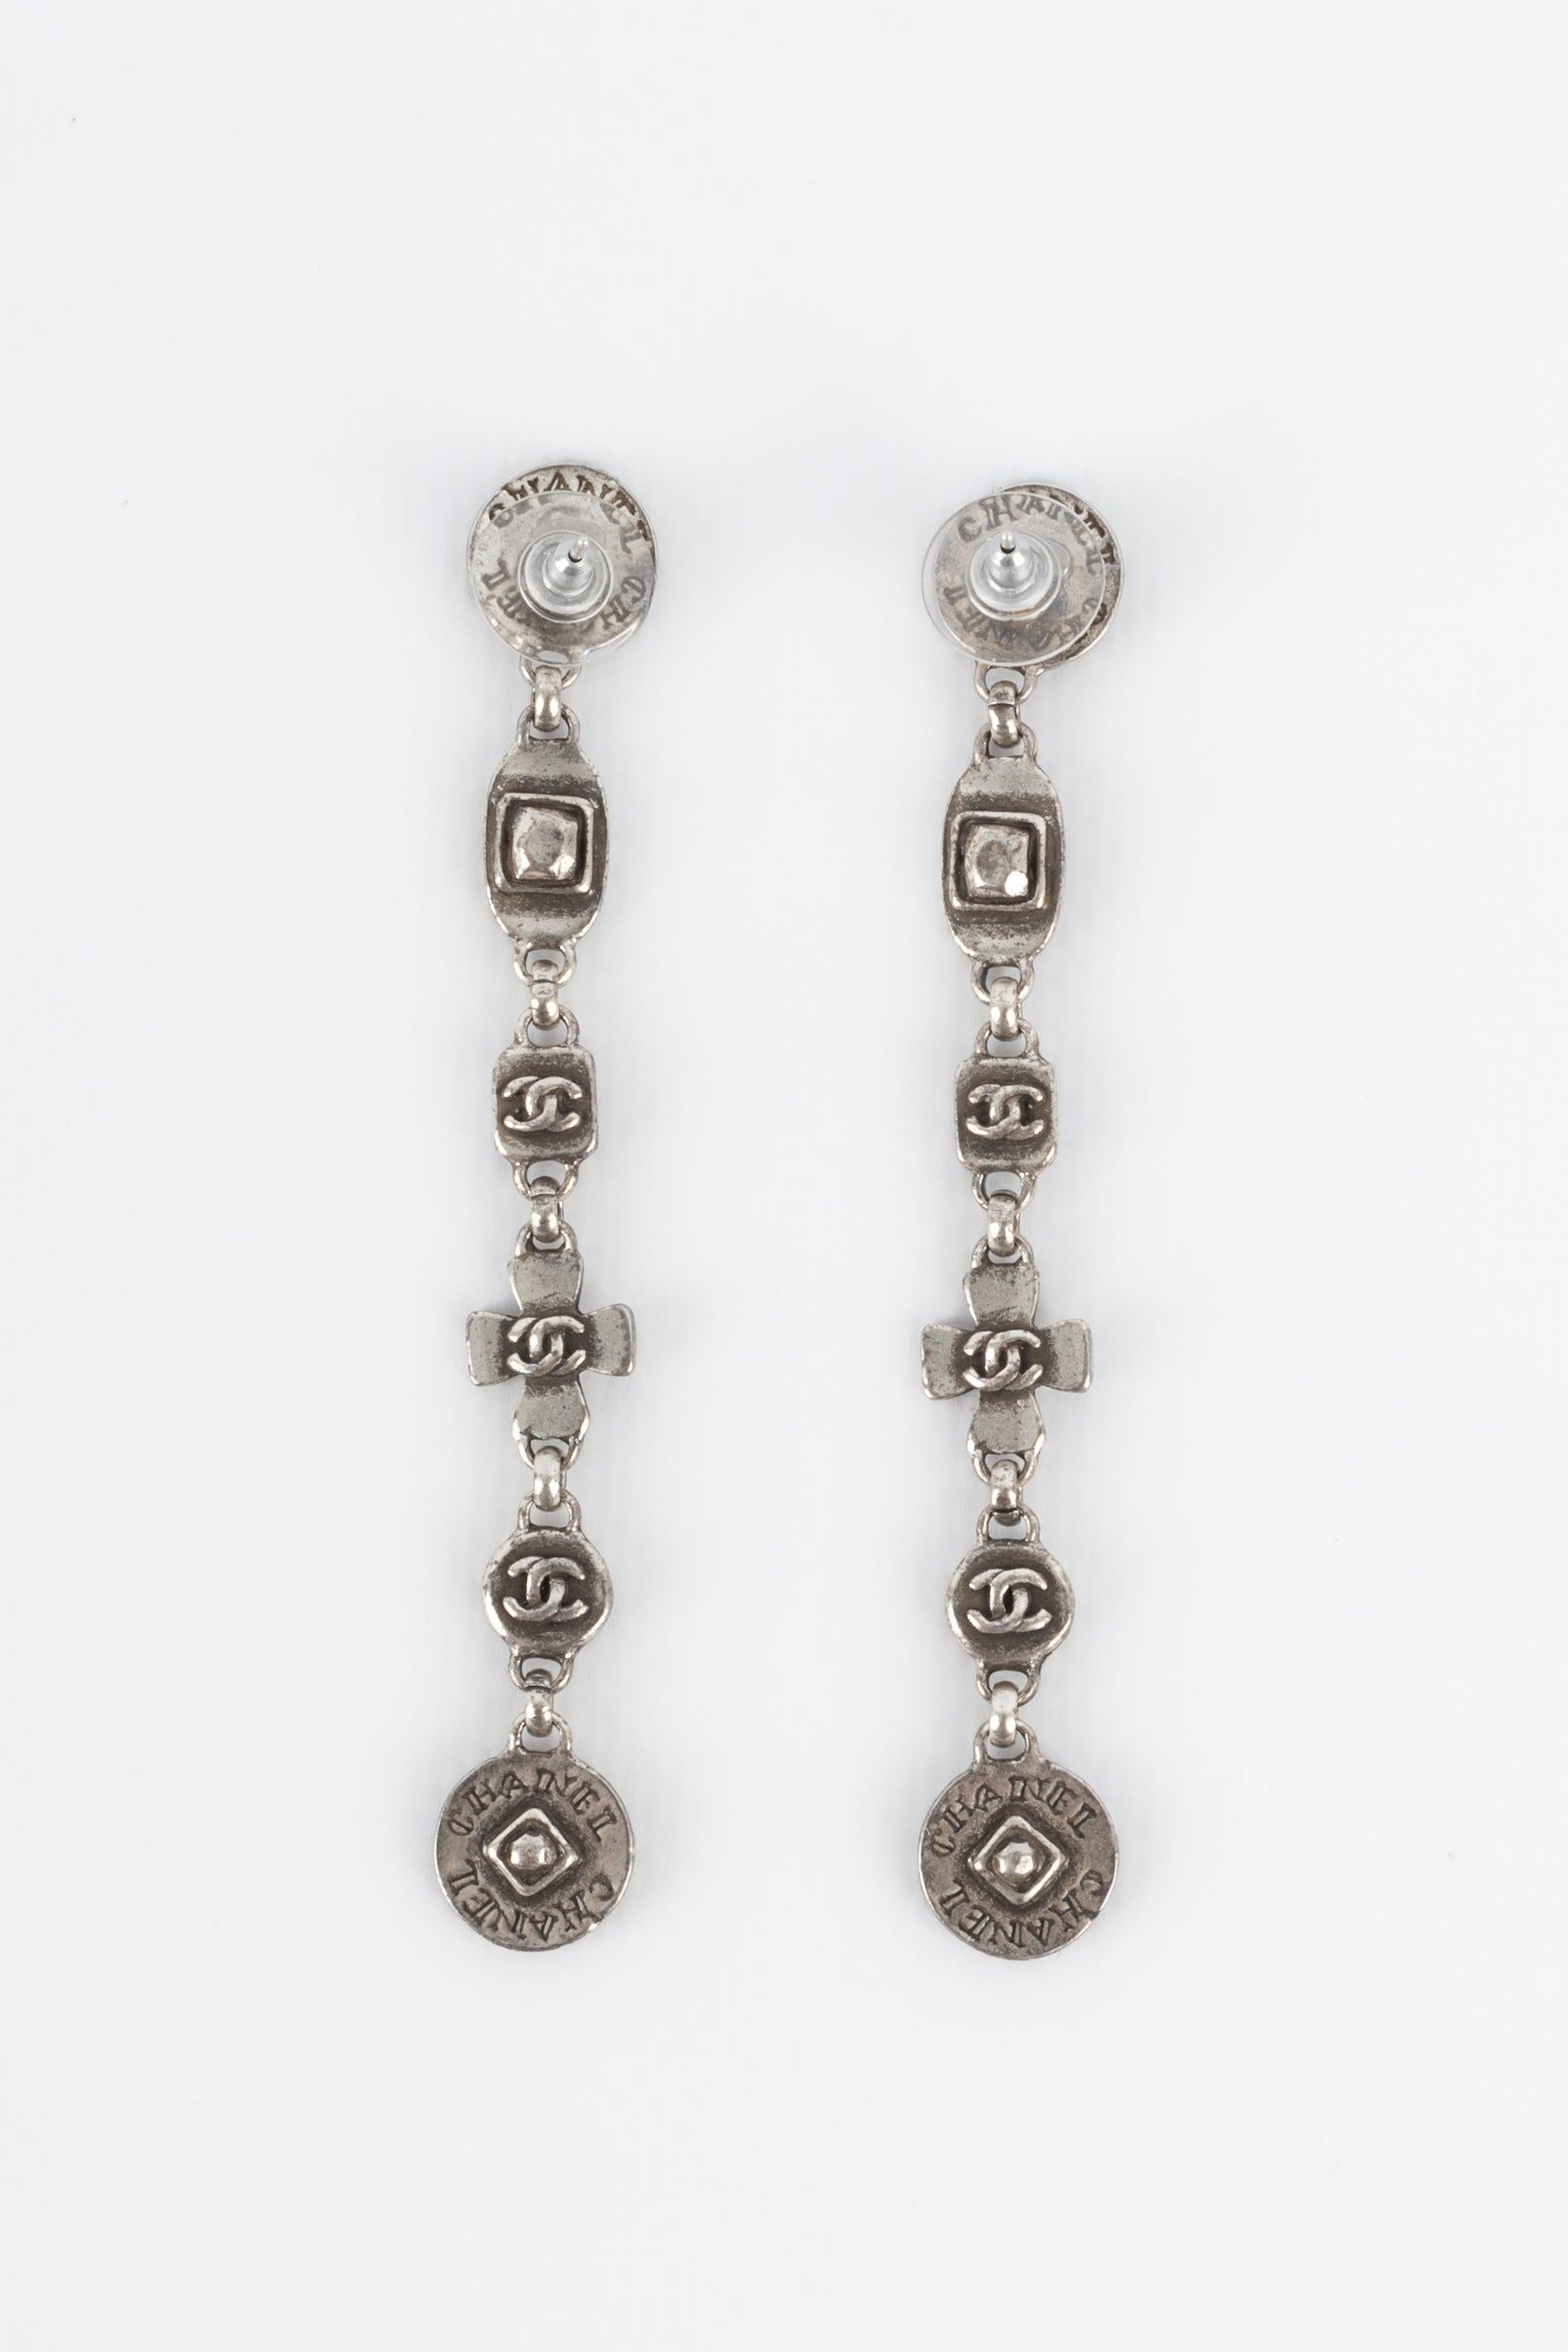 Chanel - (Made in France) Engraved silvery metal earrings. 1999 Spring-Summer Collection.
 
 Additional information: 
 Condition: Very good condition
 Dimensions: Length: 9 cm
 Period: 20th Century
 
 Seller Reference: BOB142
